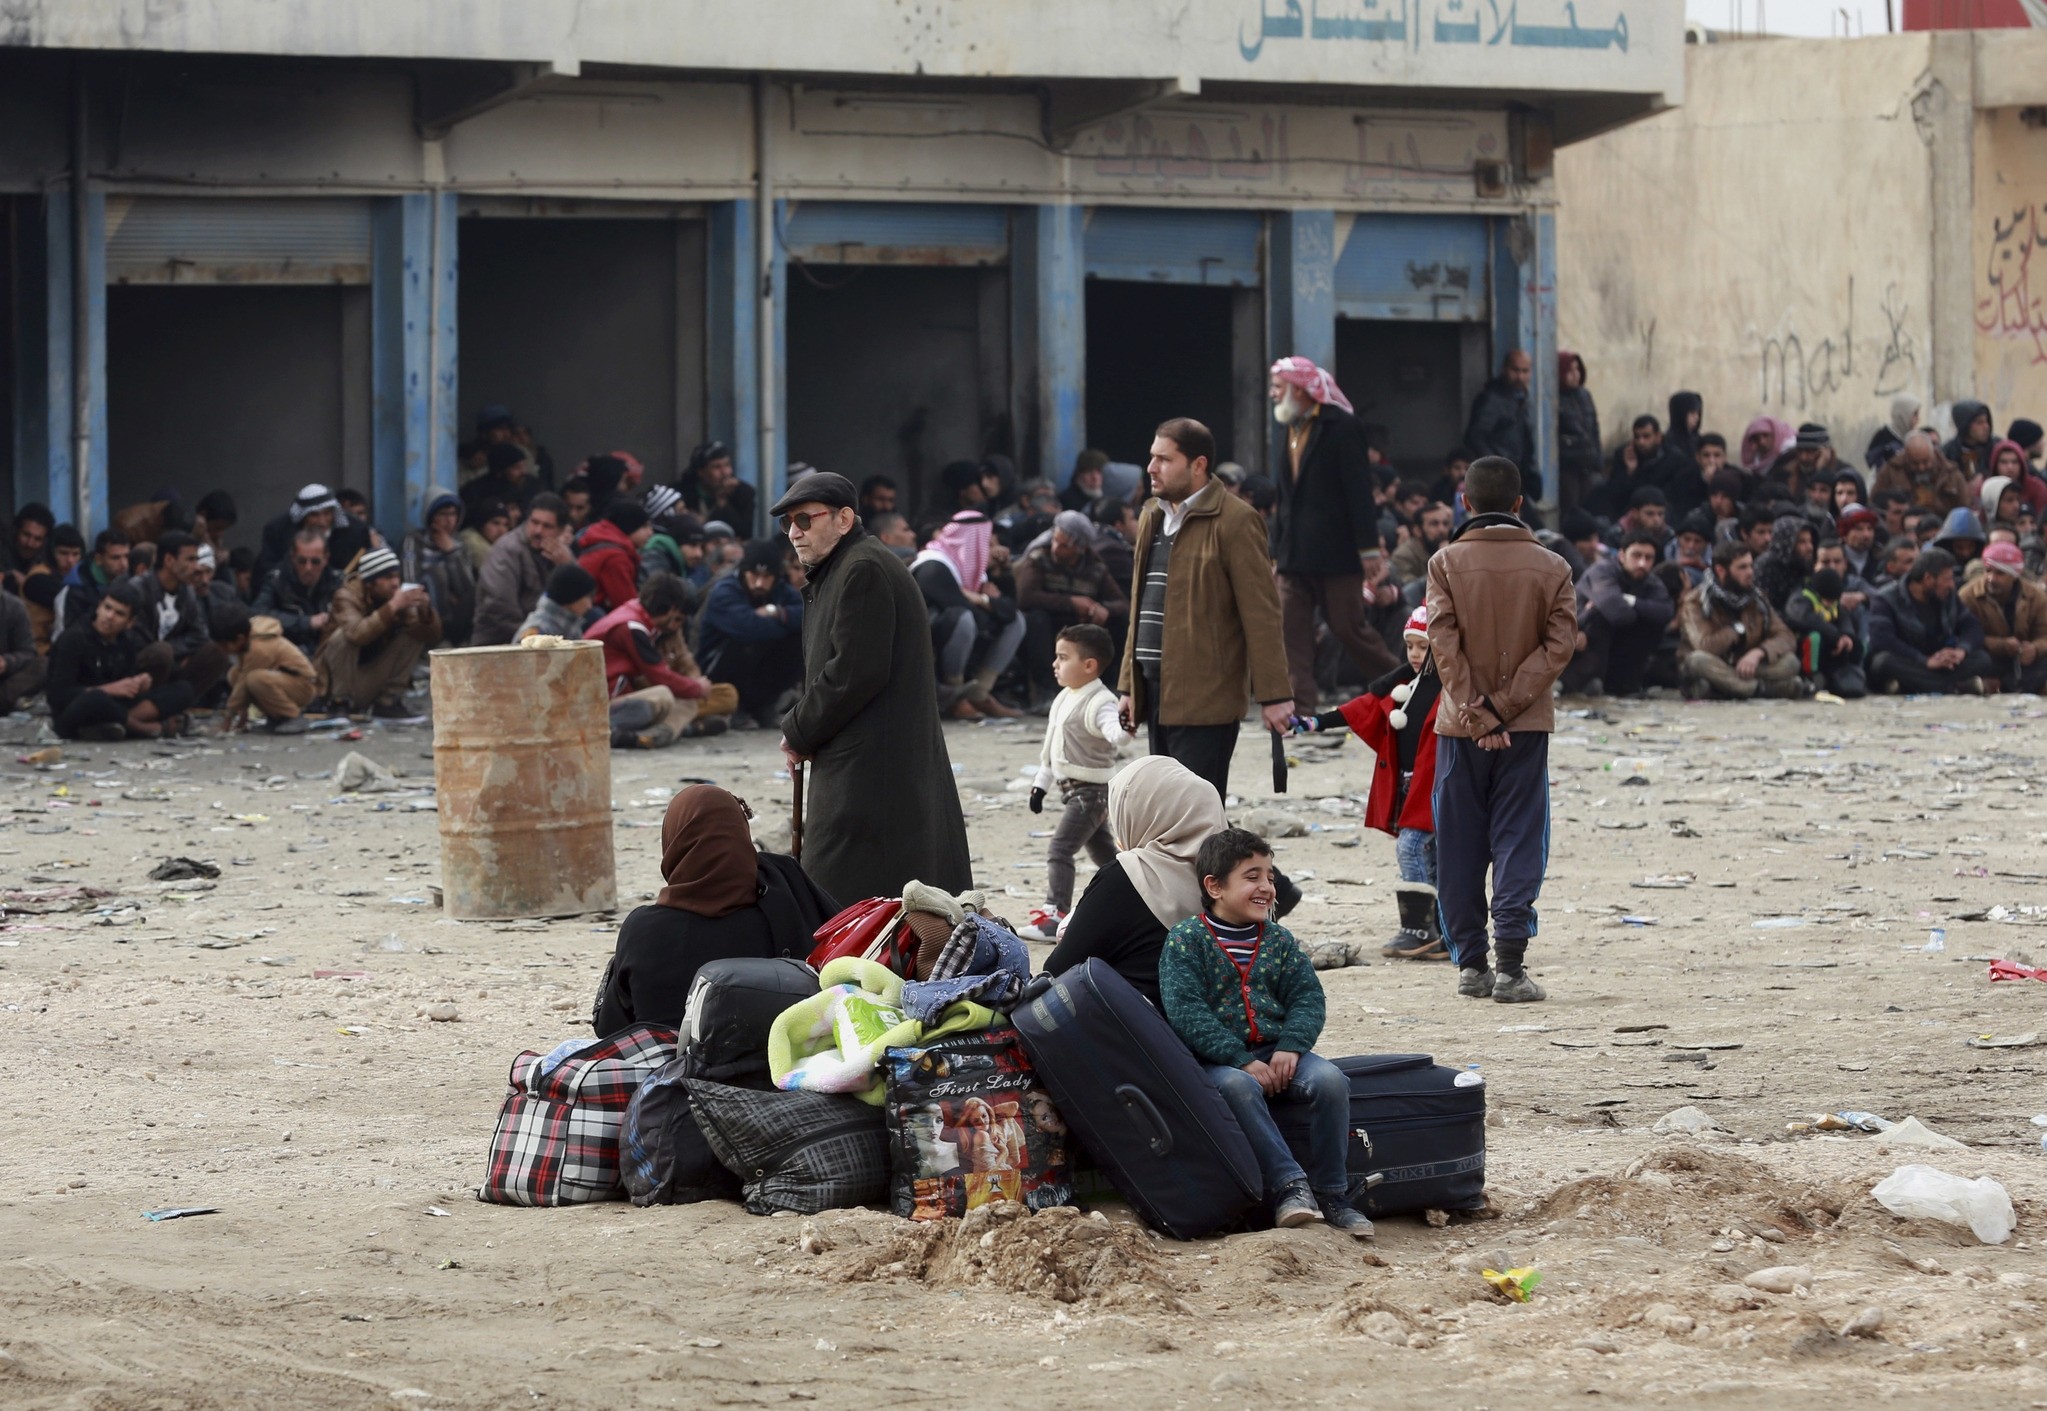 Iraqis waiting at the gathering point to be taken for a camp for internally displaced people, in Bartella, Dec 31, 2016. (AP Photo)